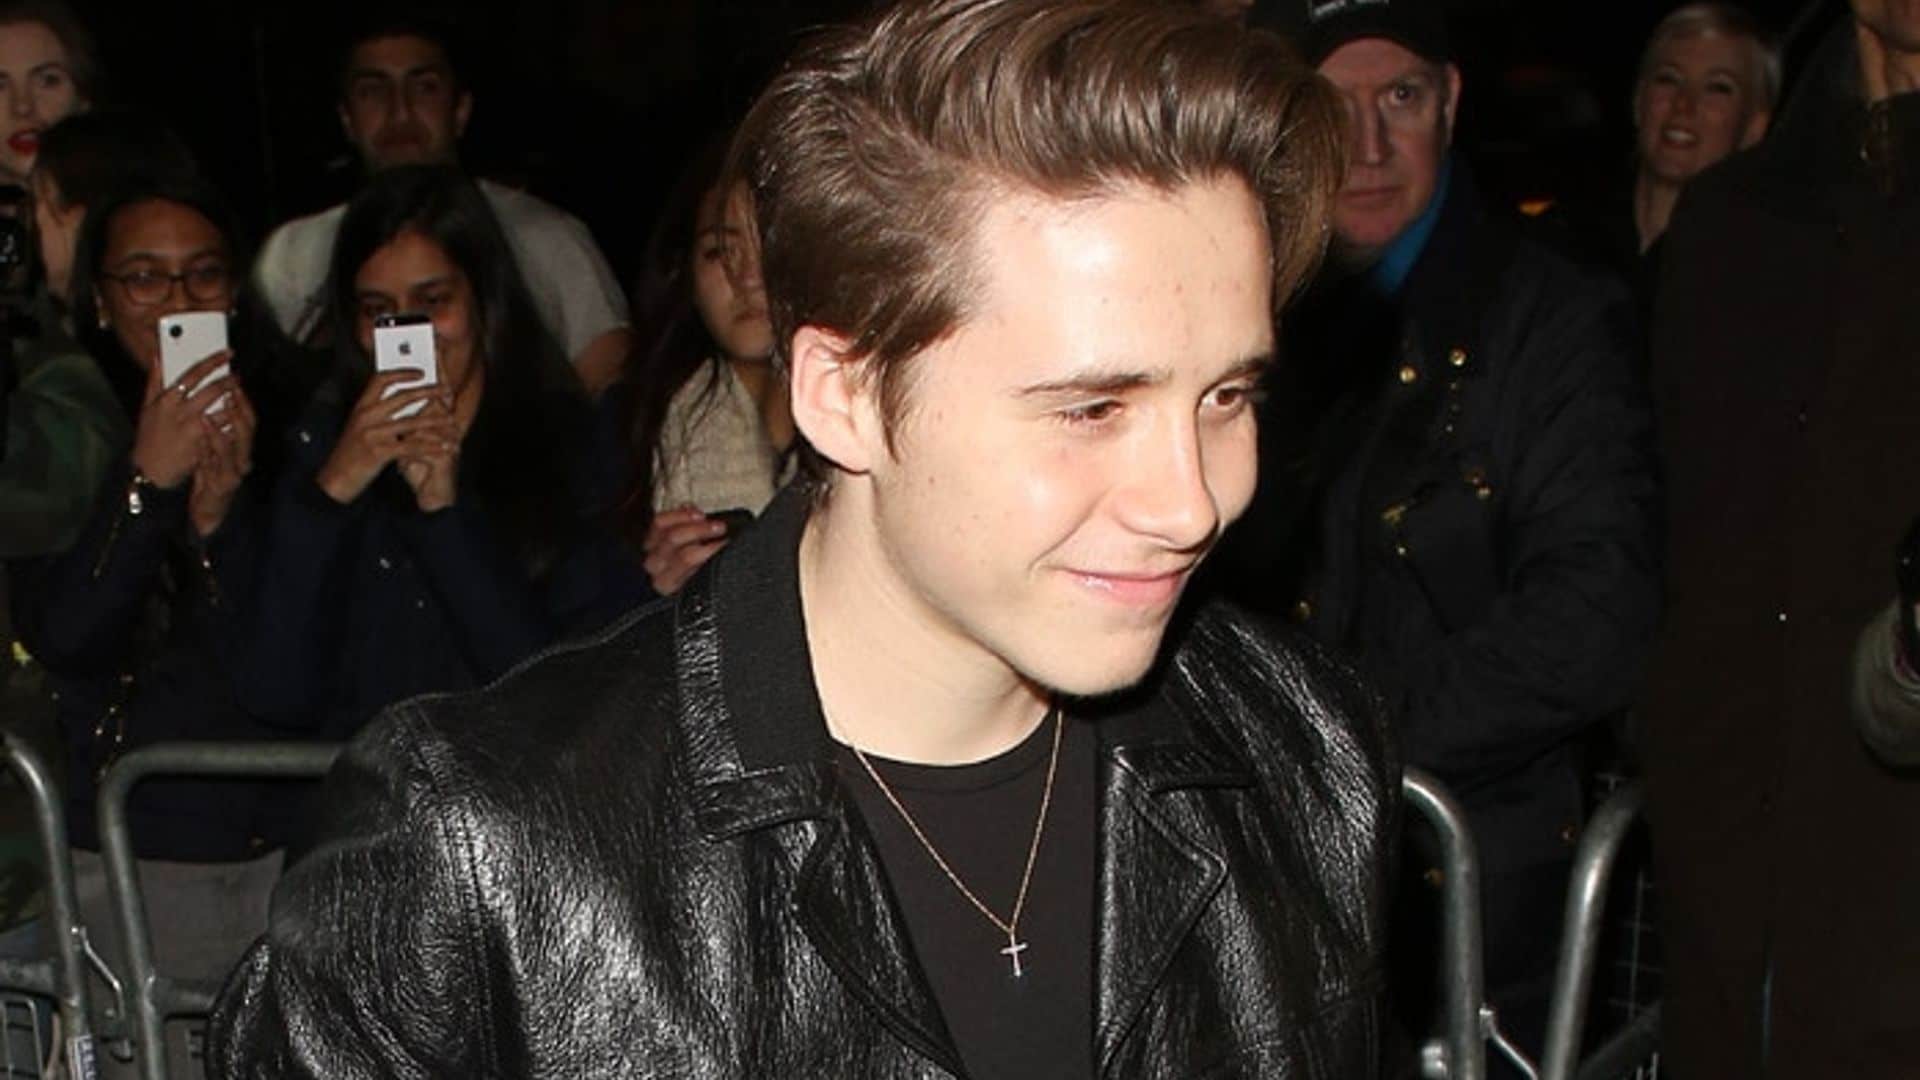 Brooklyn Beckham can't leave home without this ladies' accessory